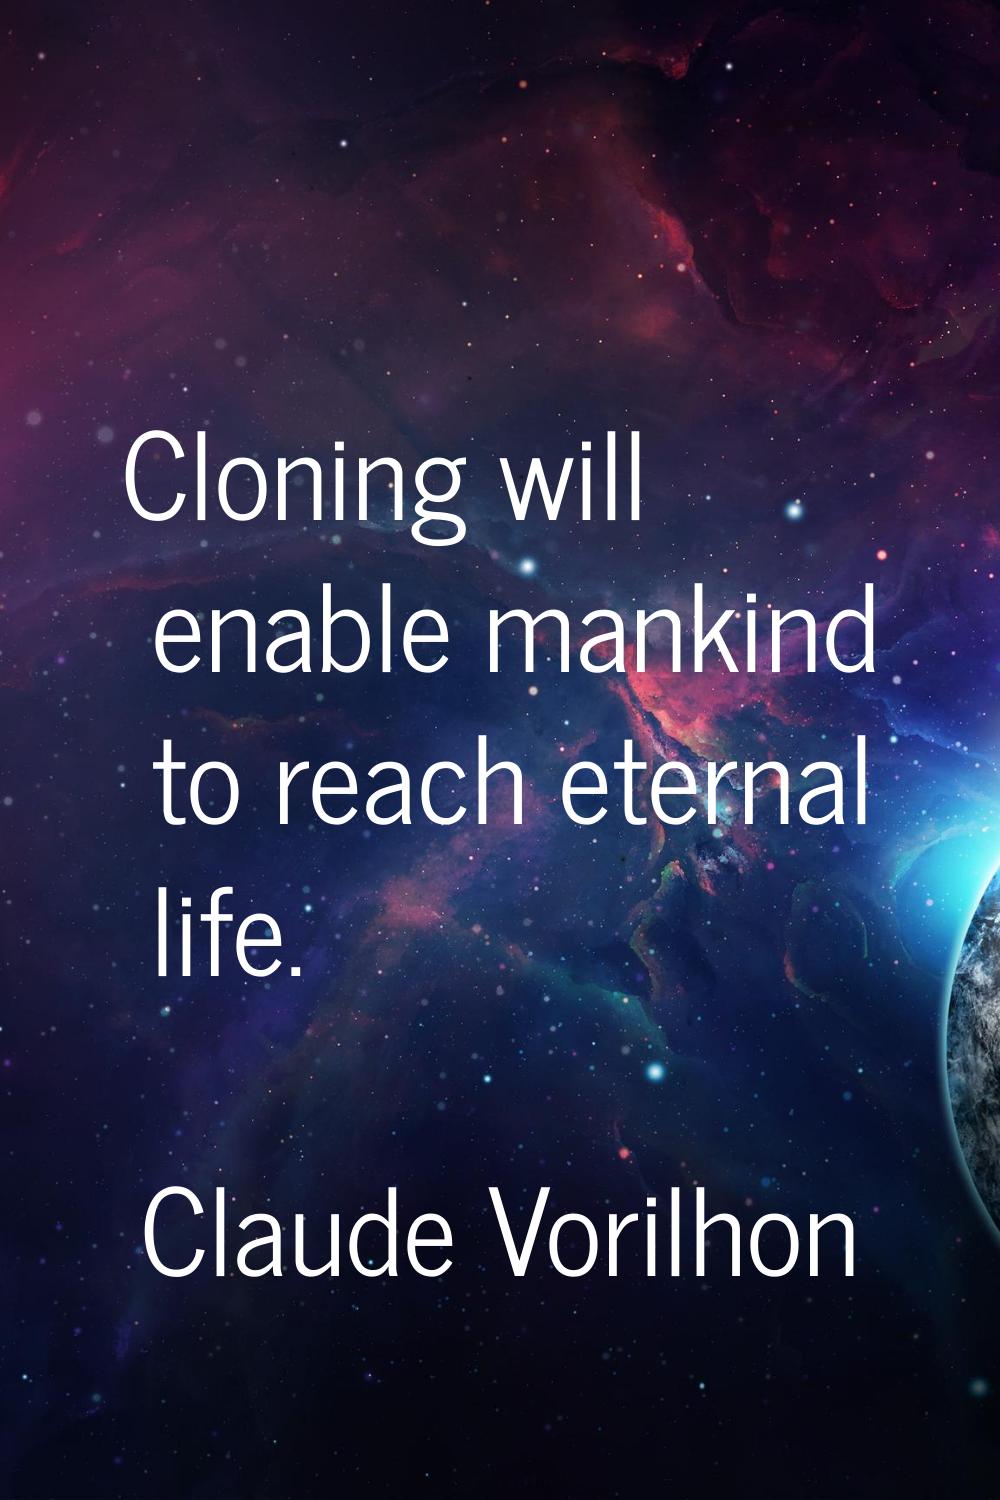 Cloning will enable mankind to reach eternal life.